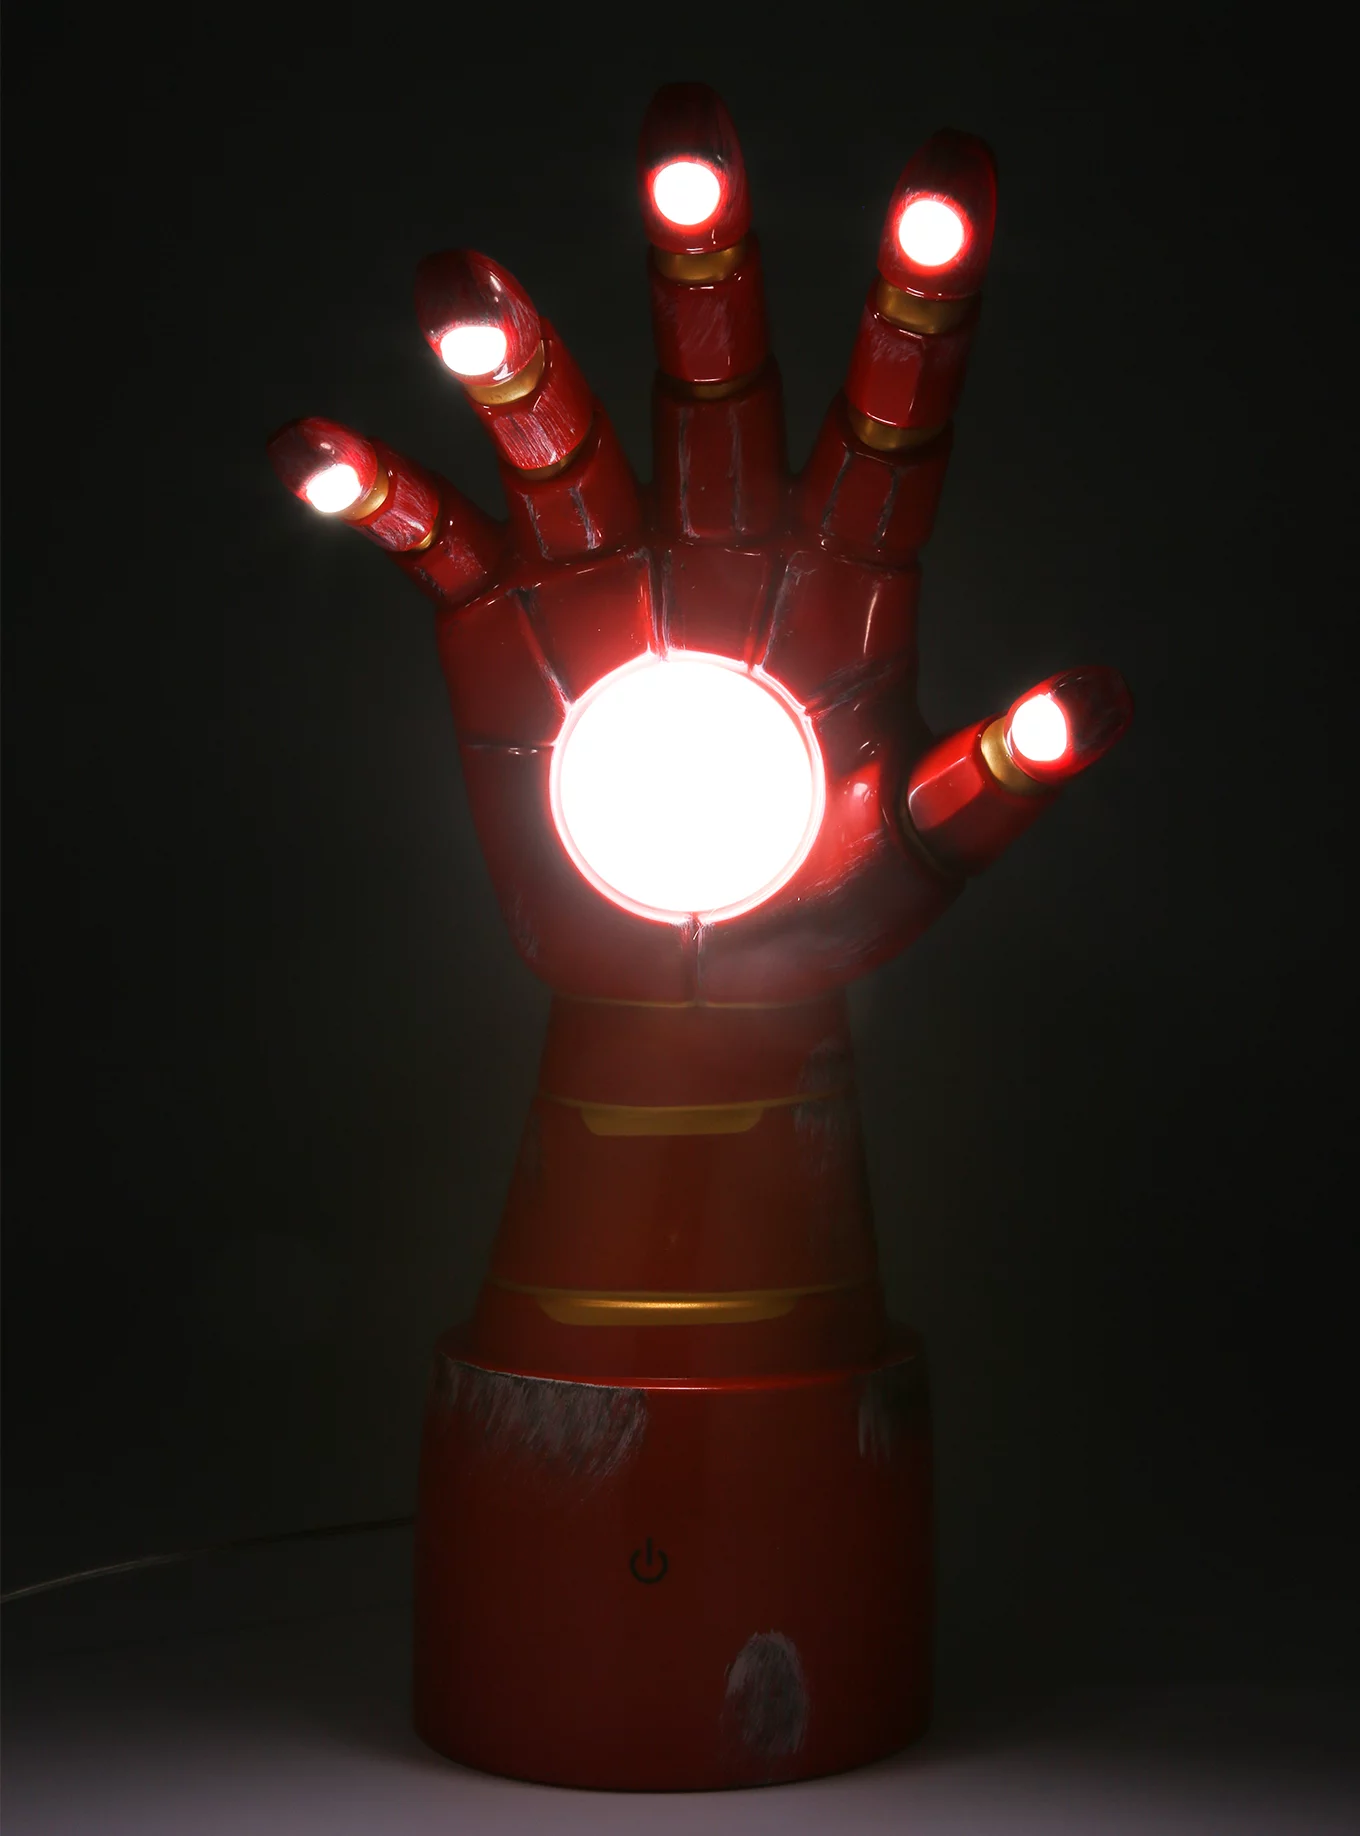 lamp shaped like iron man glove with glowing lights in the palm and fingers